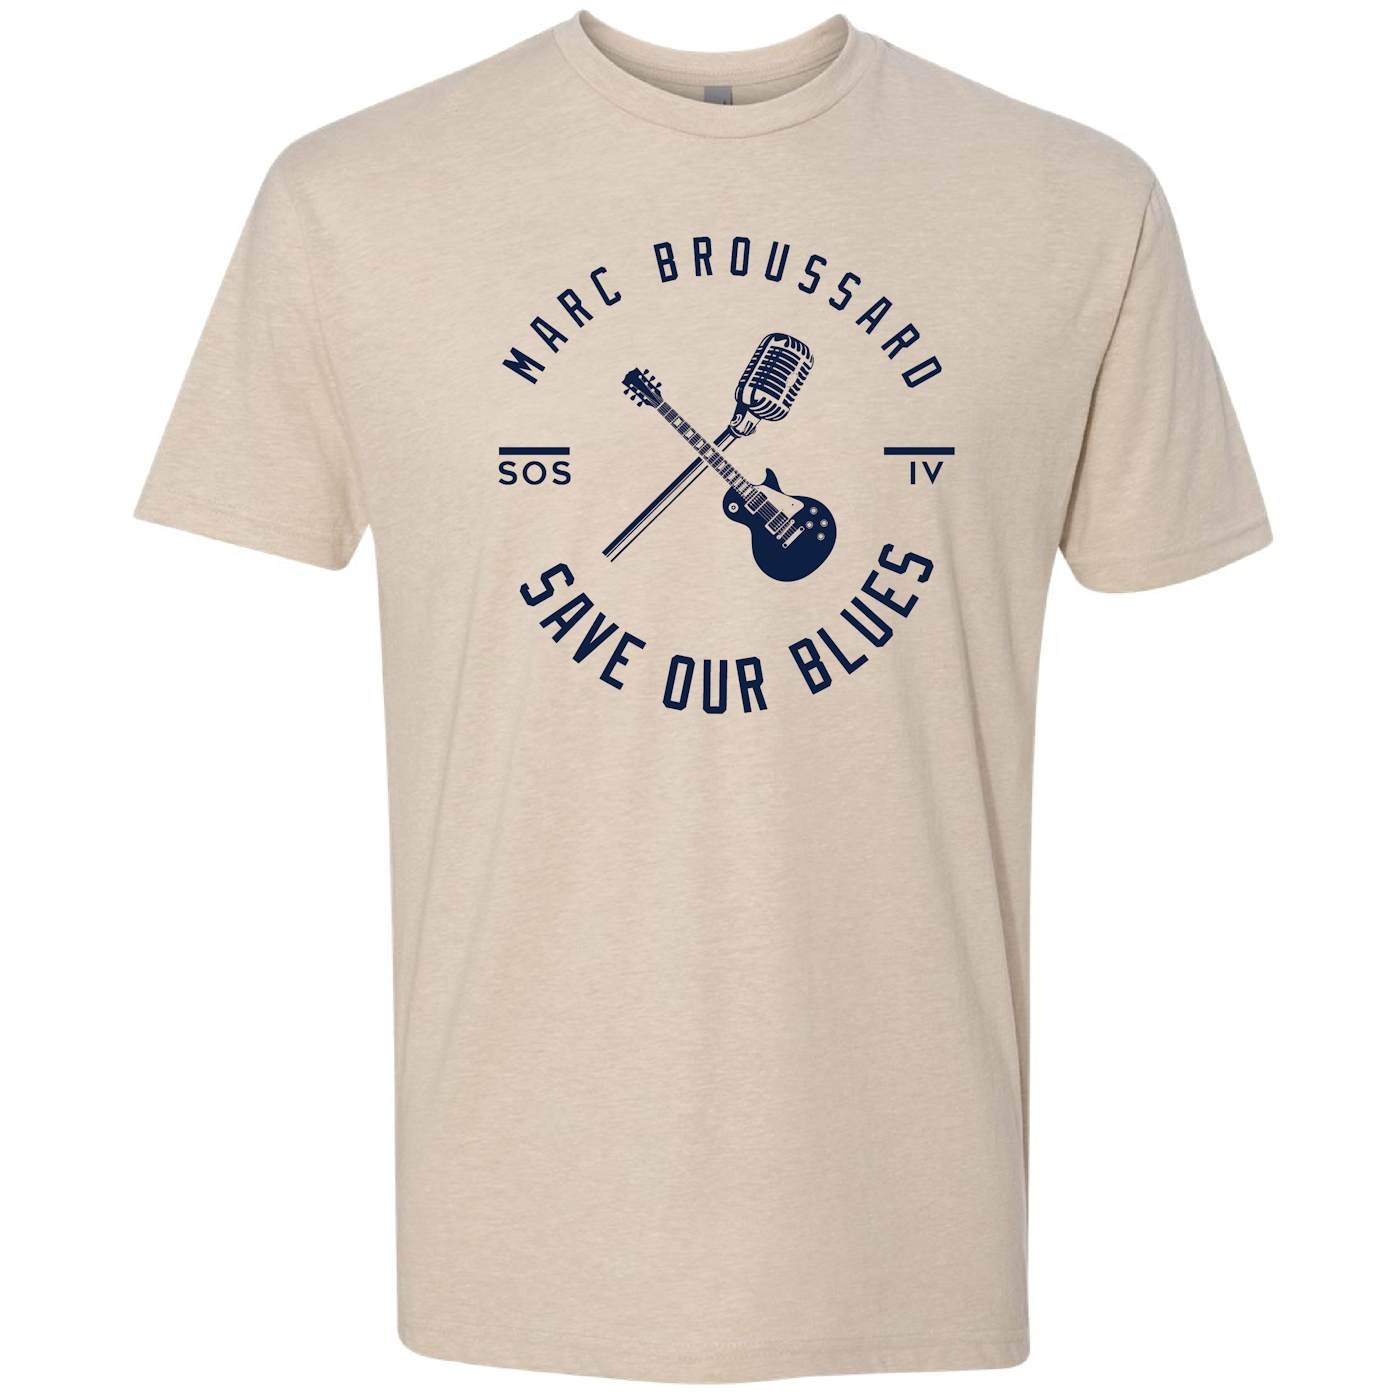 Marc Broussard - S.O.S. IV: Save Our Blues Tee